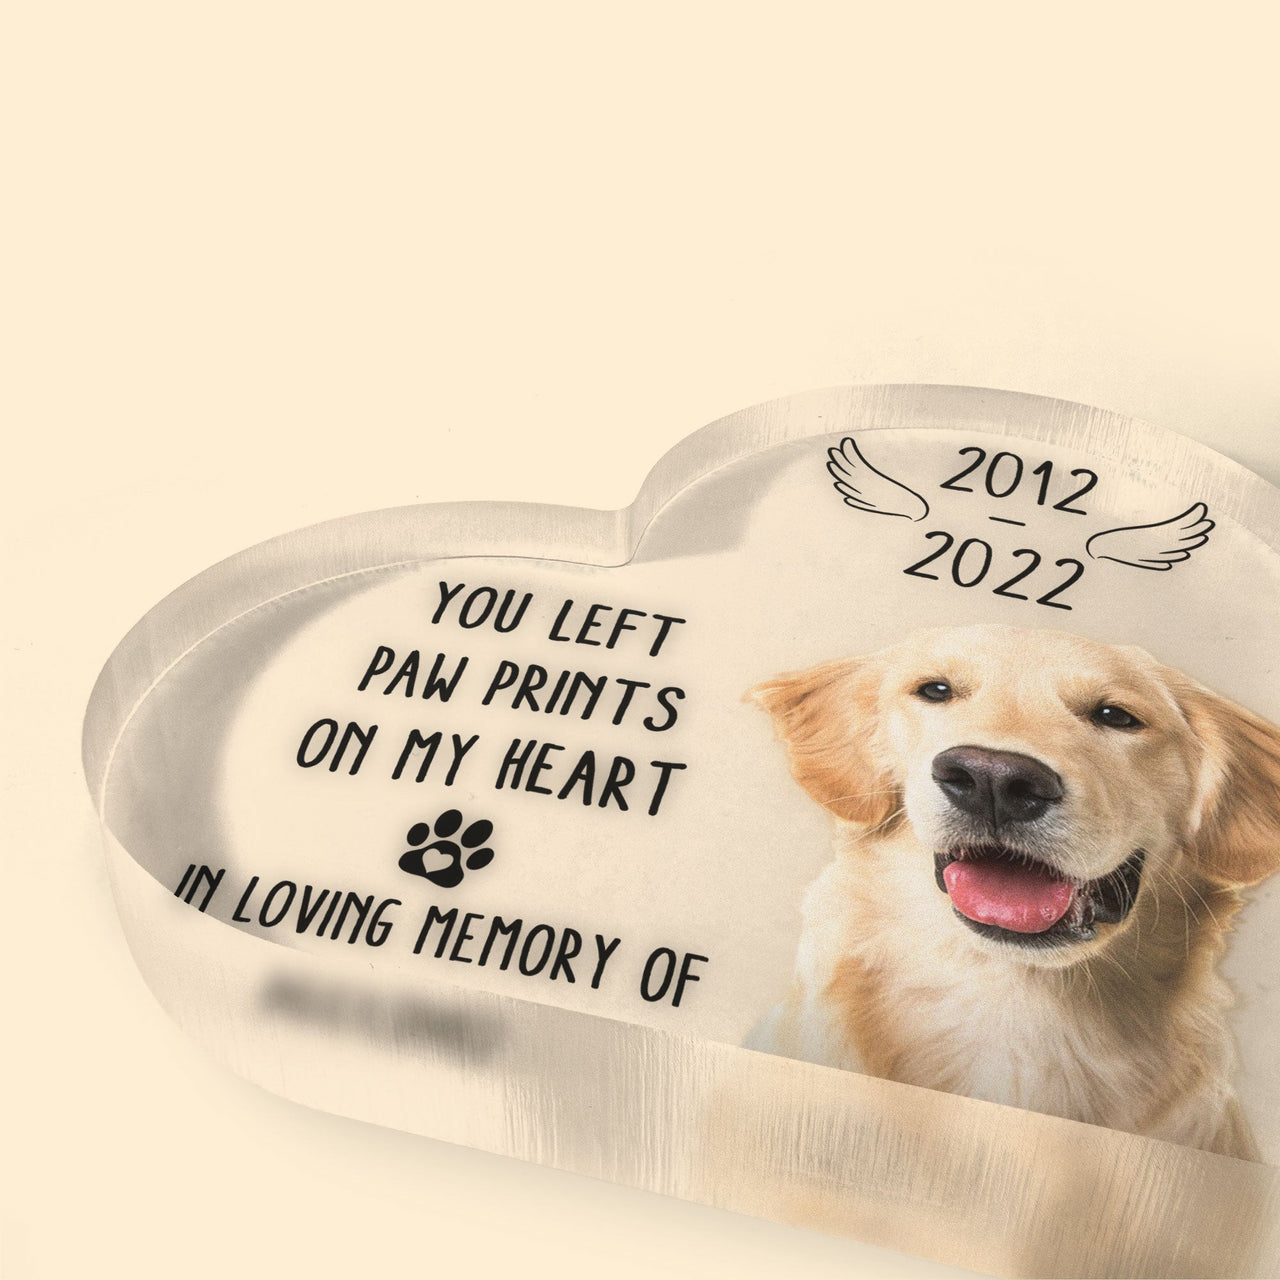 You Left Paw Prints On My Heart - Personalized Memorial Heart Acrylic Plaque, Loving Gift For Pet Loss Owners